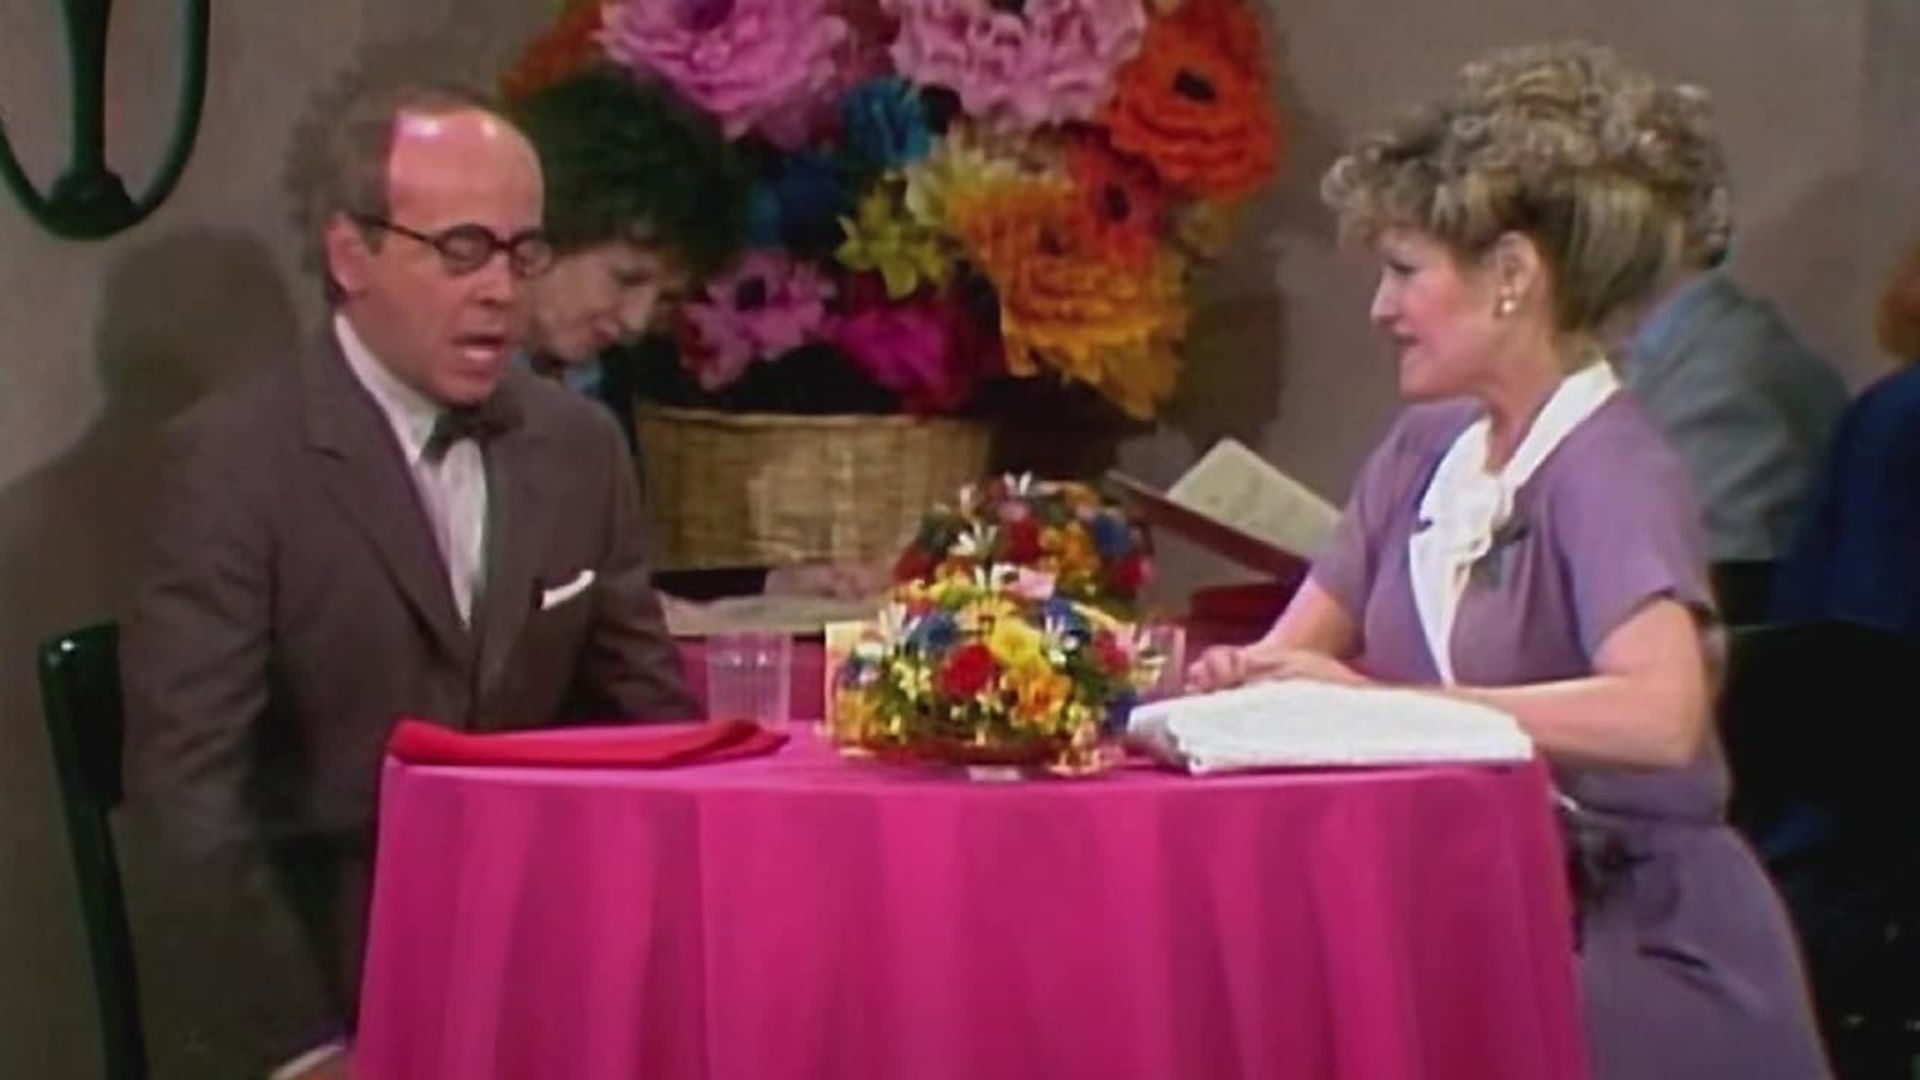 The Tim Conway Show background